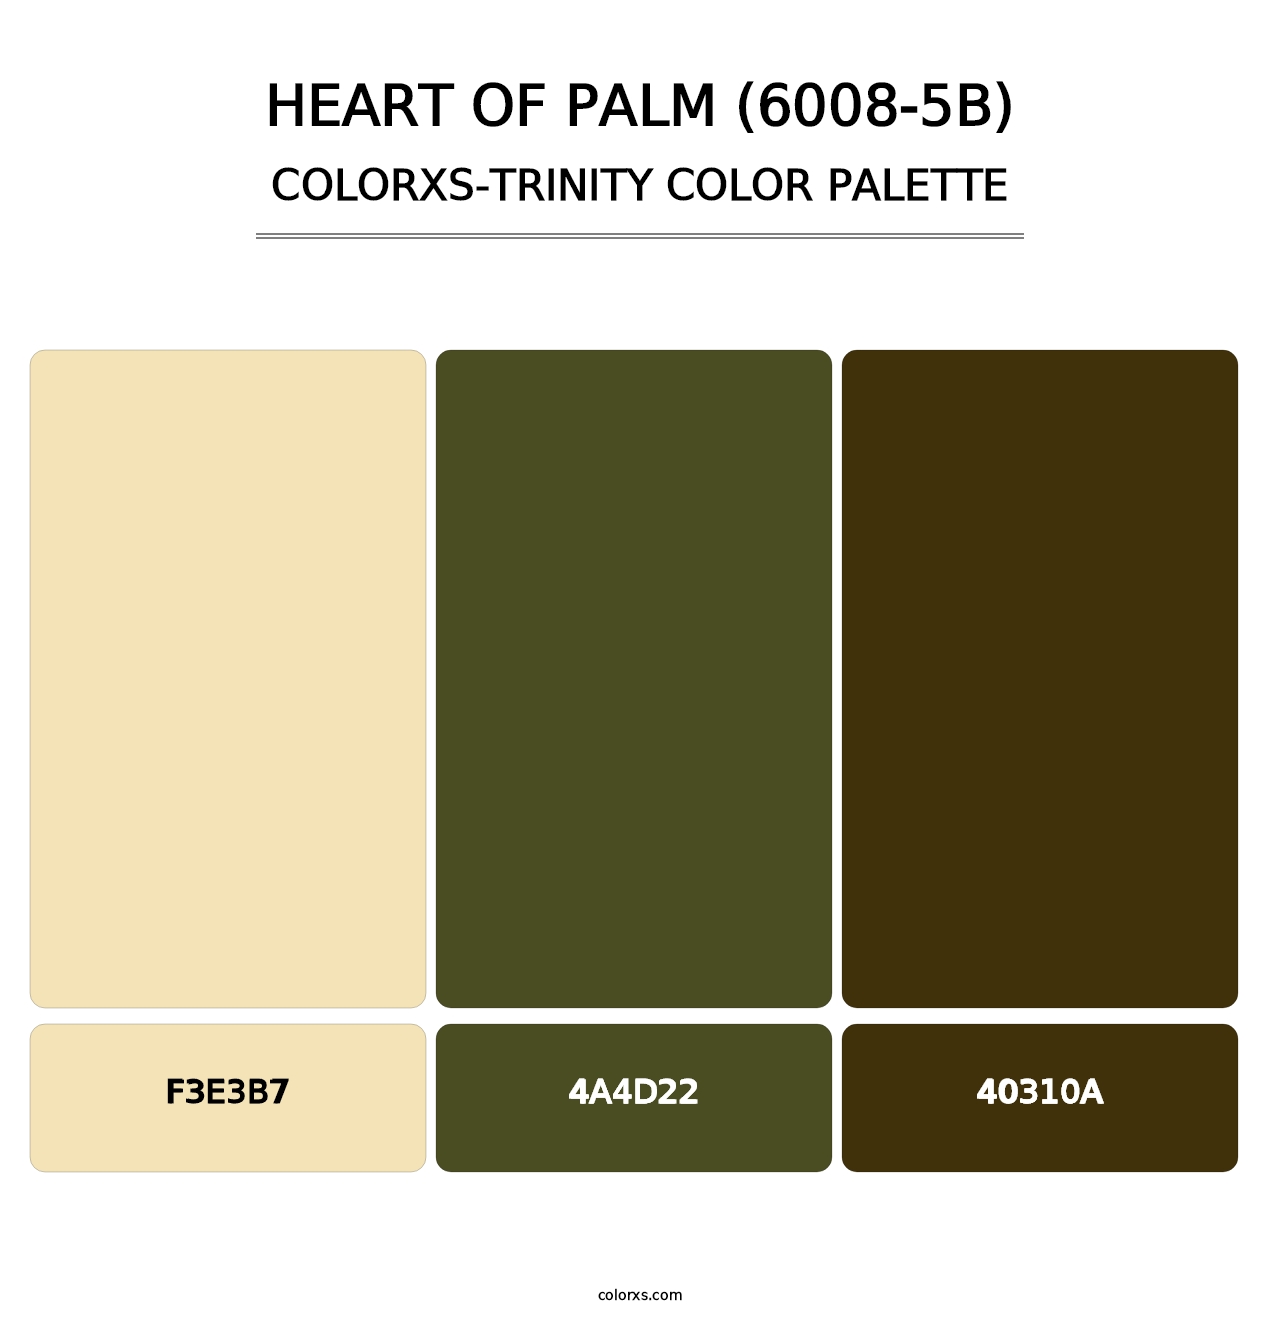 Heart of Palm (6008-5B) - Colorxs Trinity Palette